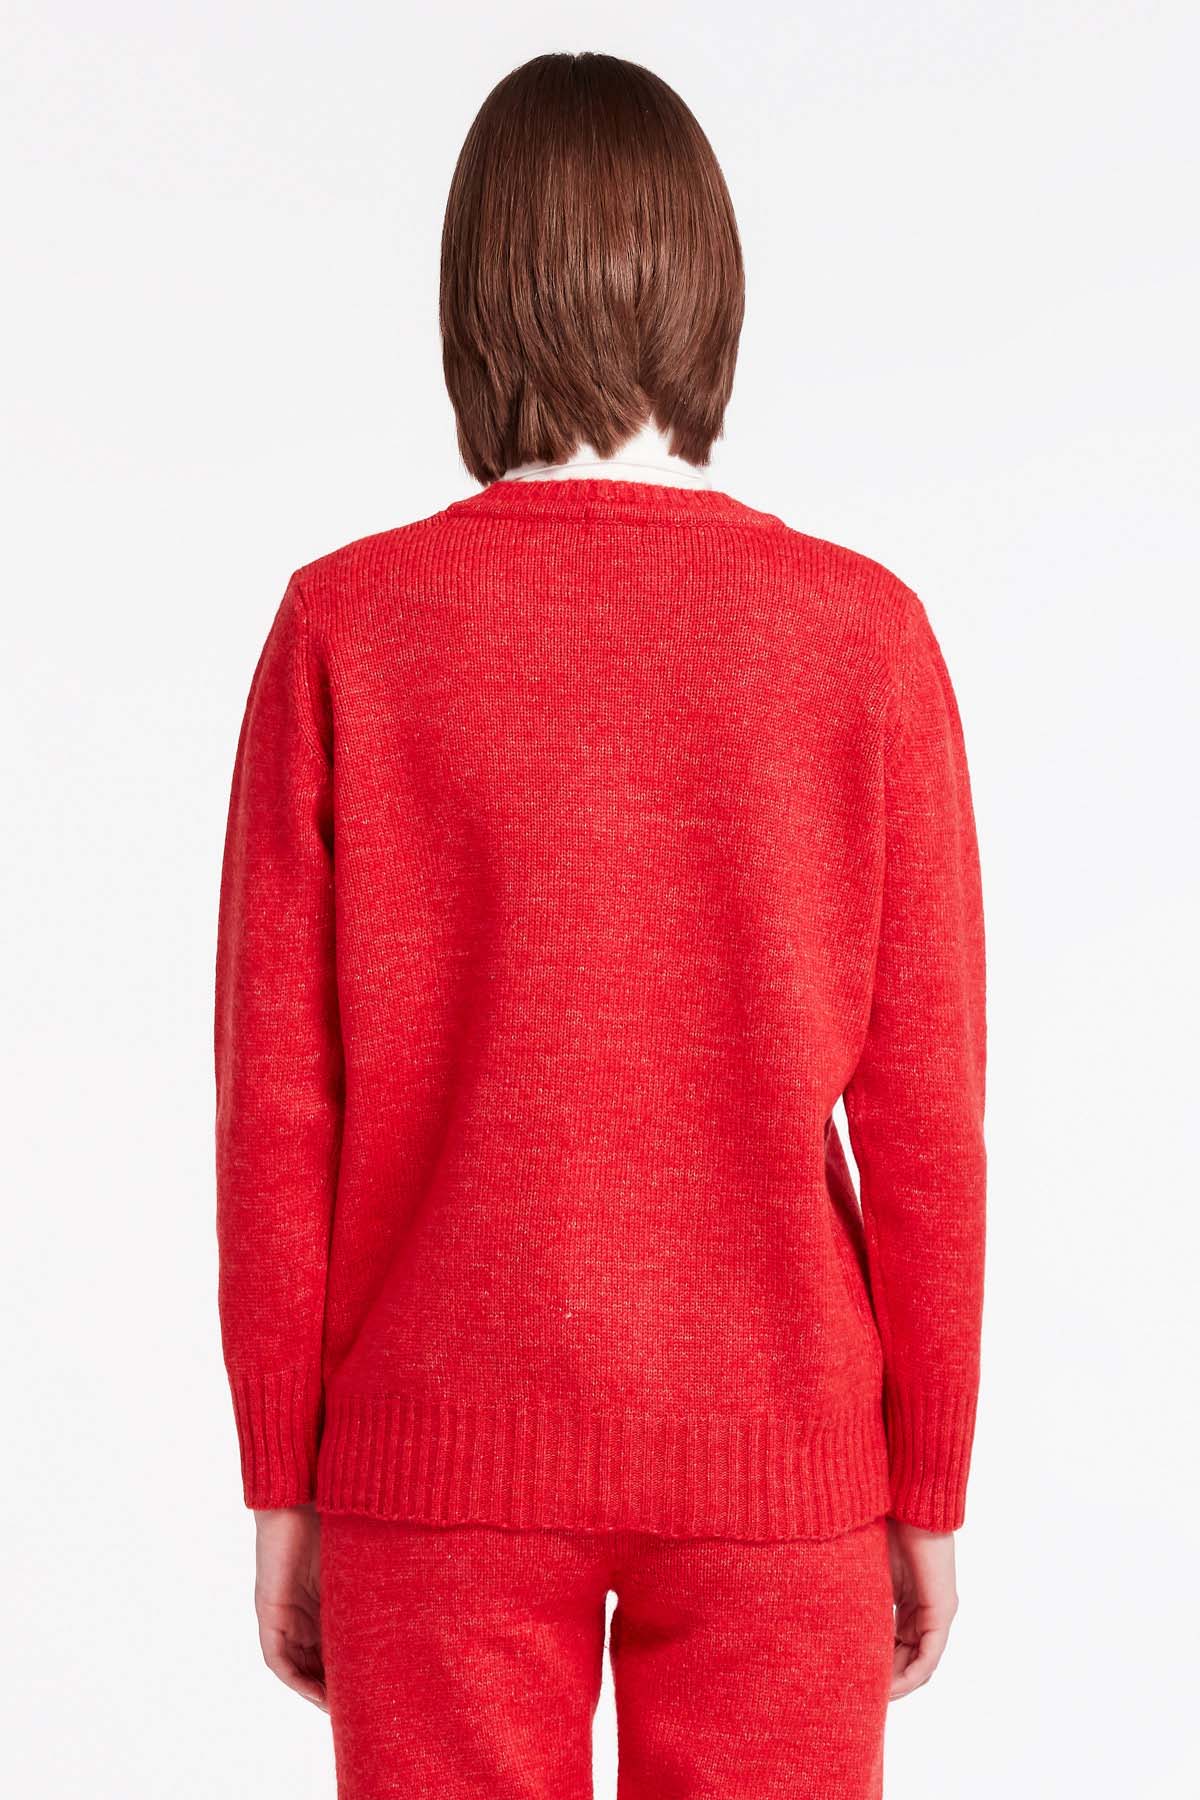 Red V-neck sweater, photo 4